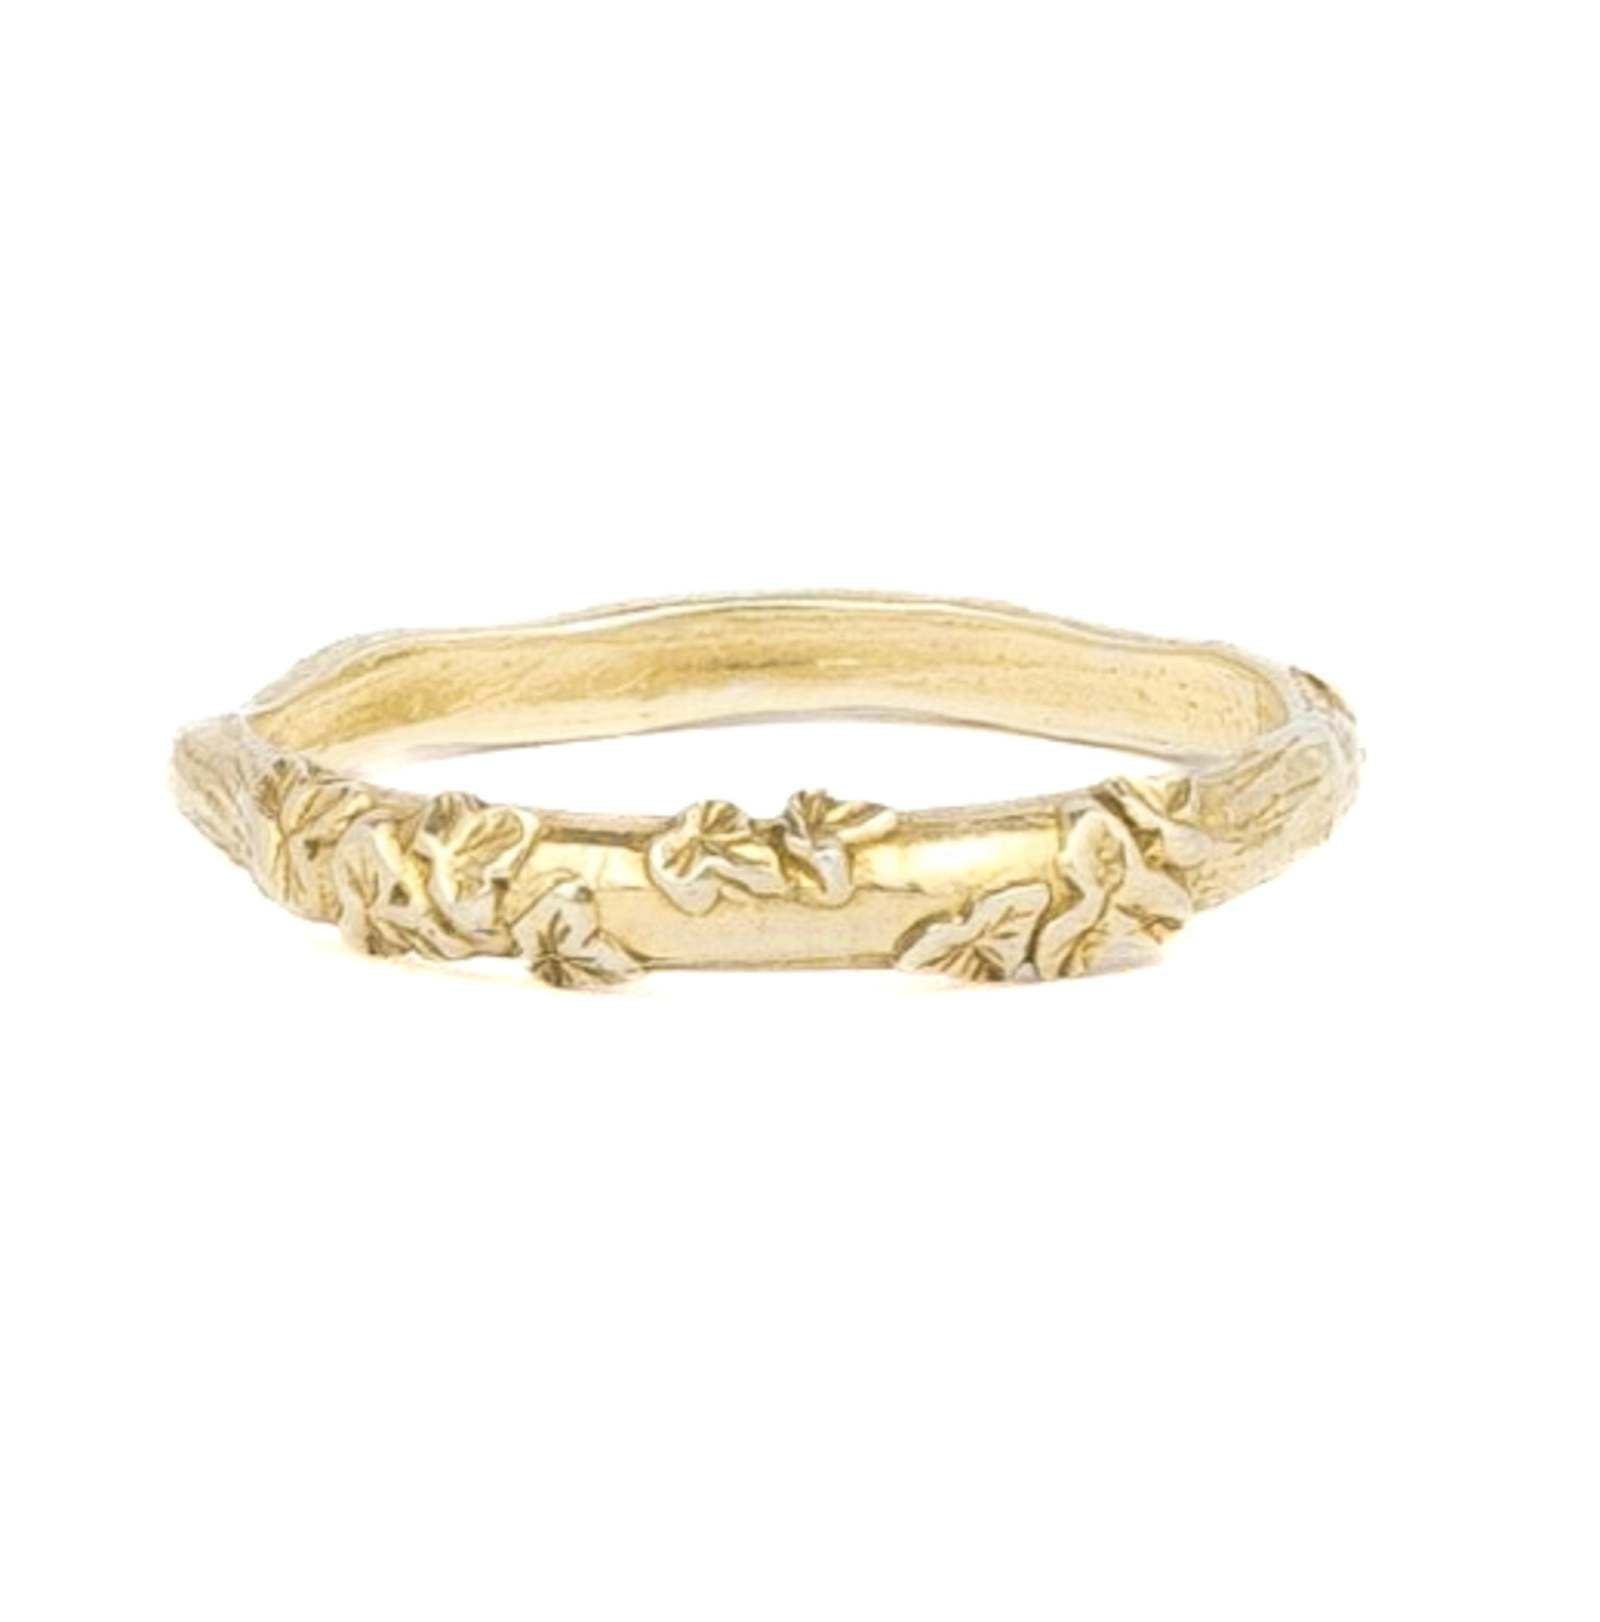 Engraved Leaf ring with ivy leaves in yellow gold